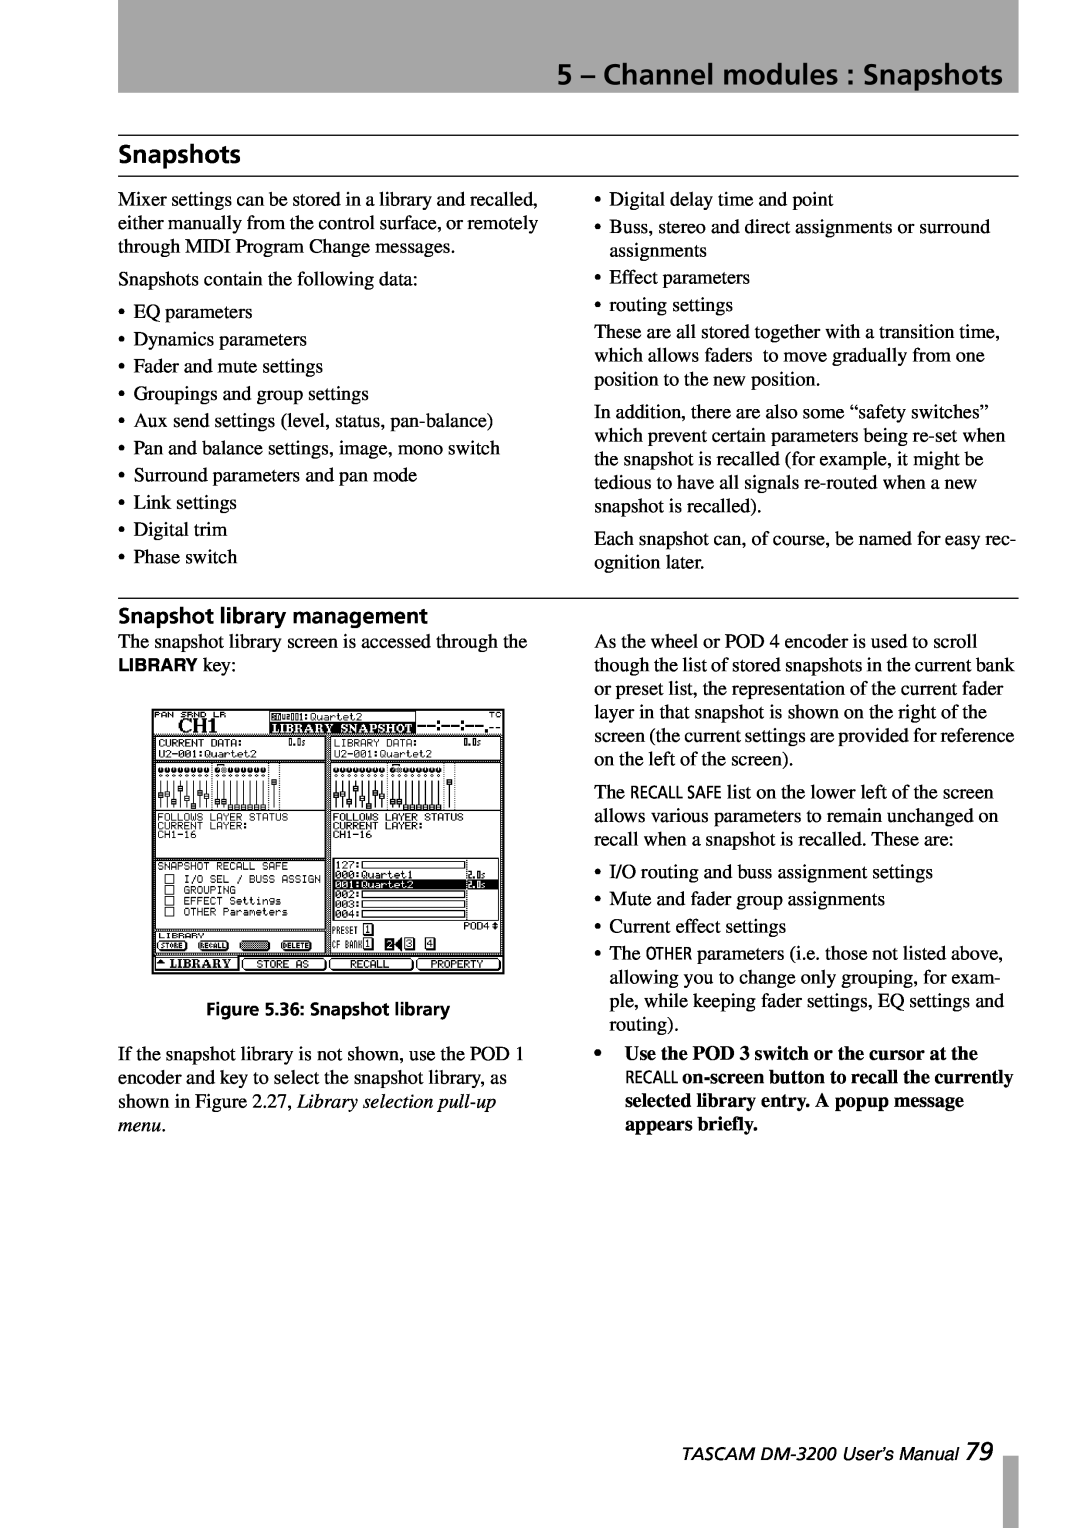 Tascam DM-3200 owner manual 5 – Channel modules : Snapshots, Snapshot library management 